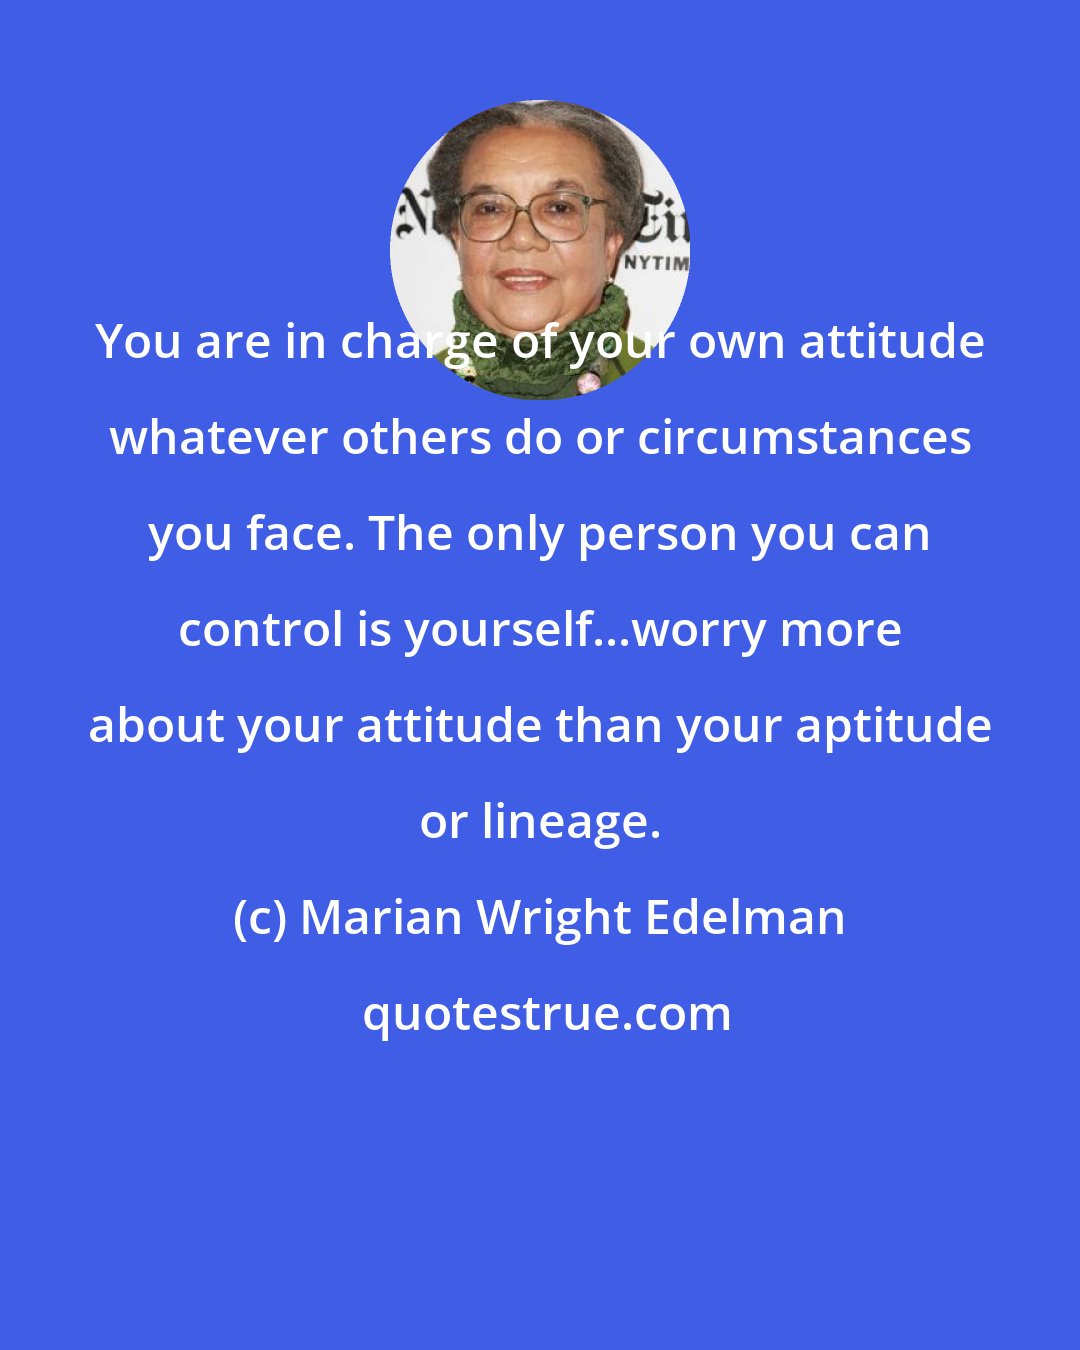 Marian Wright Edelman: You are in charge of your own attitude whatever others do or circumstances you face. The only person you can control is yourself...worry more about your attitude than your aptitude or lineage.